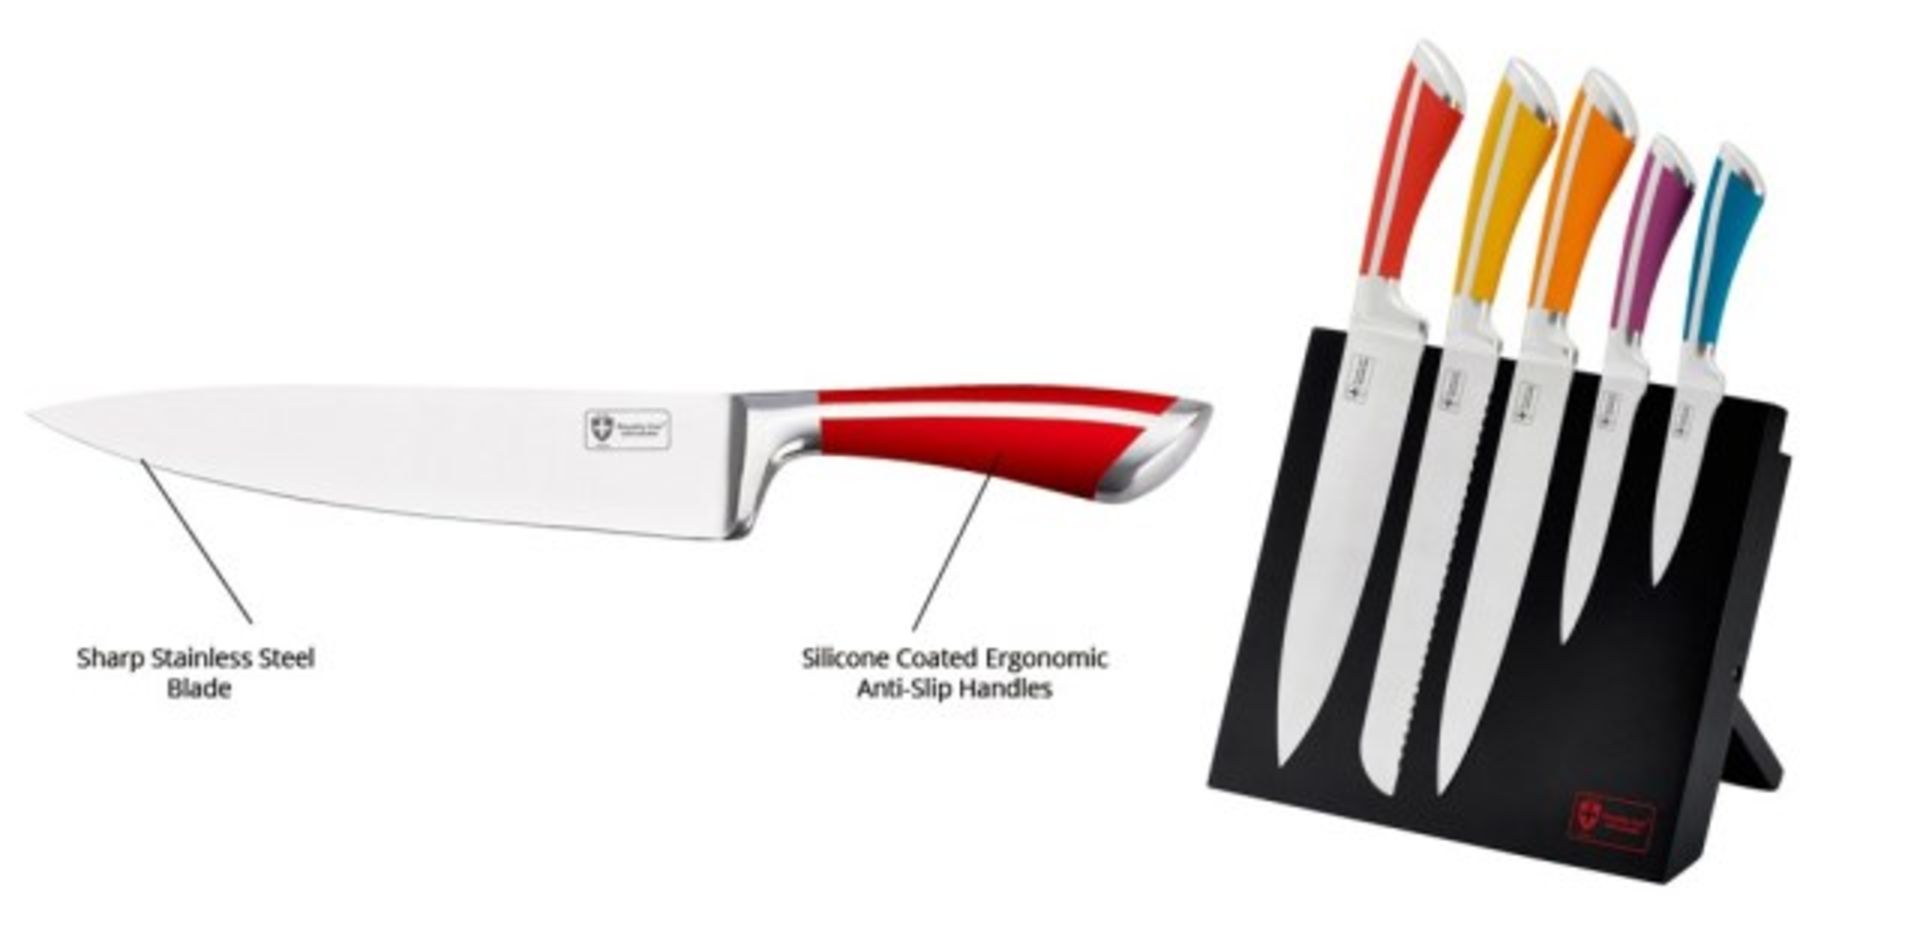 V *TRADE QTY* Brand New 5 Piece Swiss Knife Set With Folding Magnetic Stand RRP199 Euros X 3 YOUR